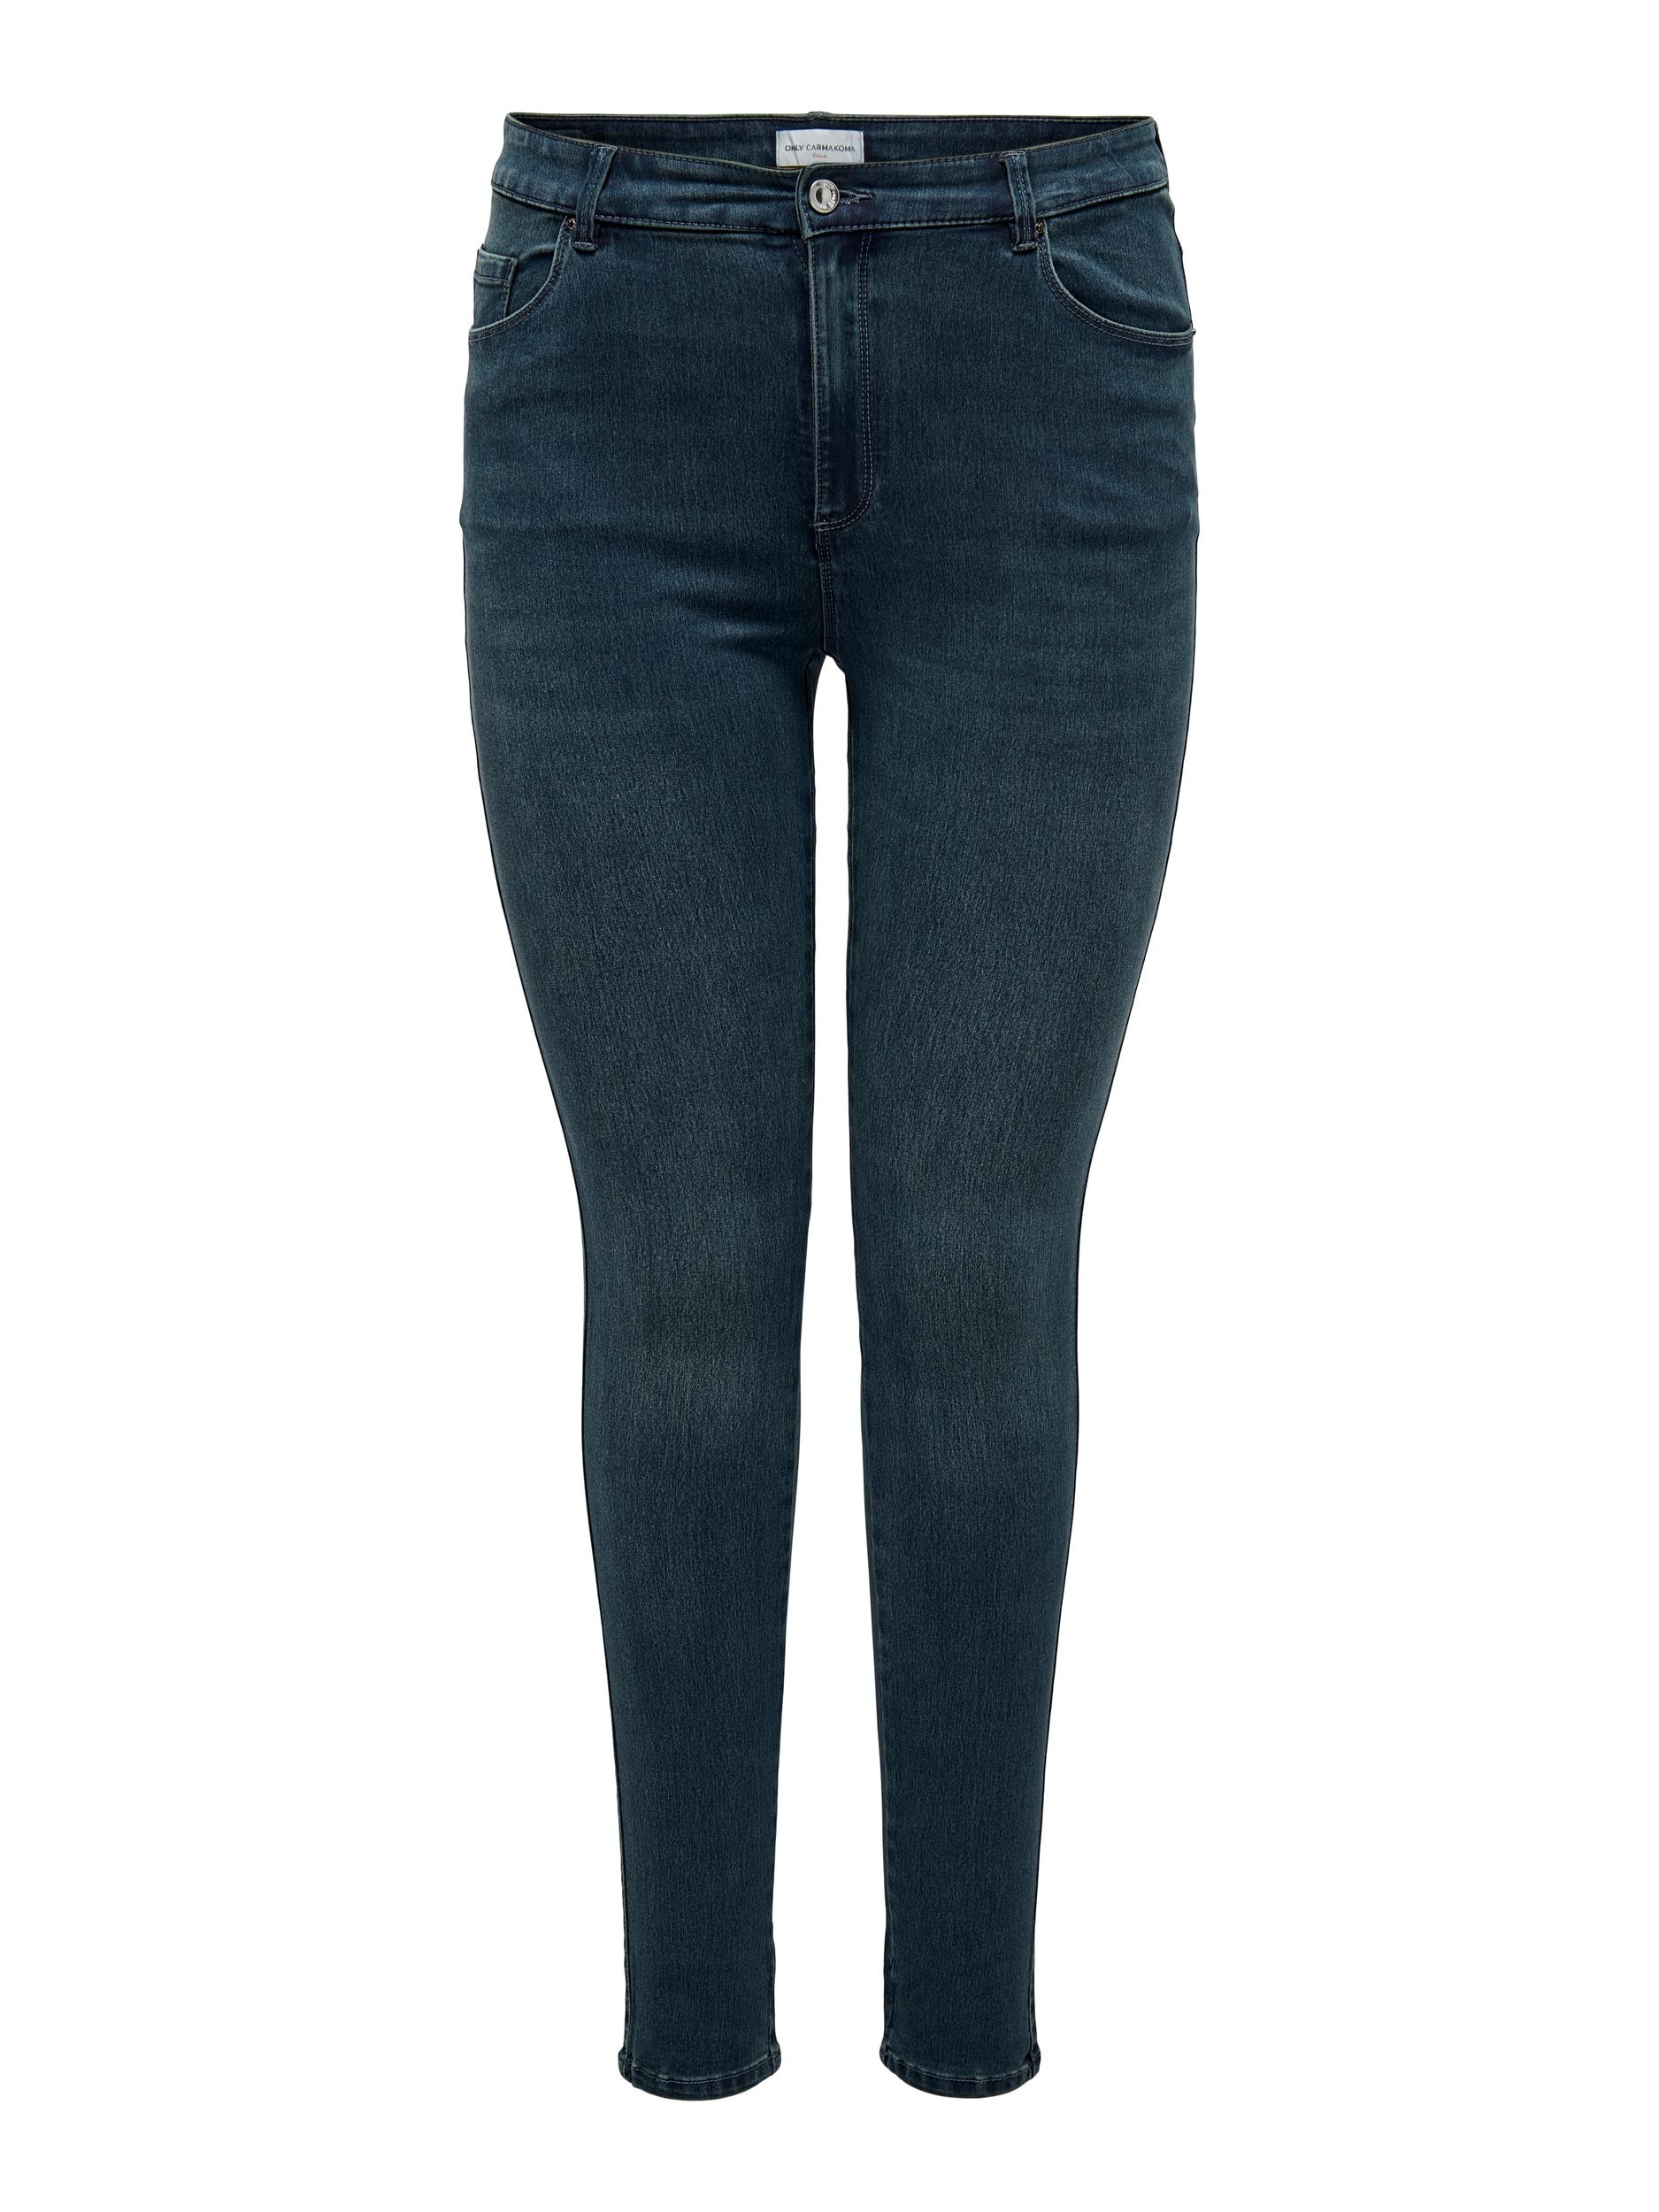 »CARAUGUSTA ♕ CARMAKOMA Skinny-fit-Jeans BJ558 DNM HW NOOS« bei ONLY SKINNY